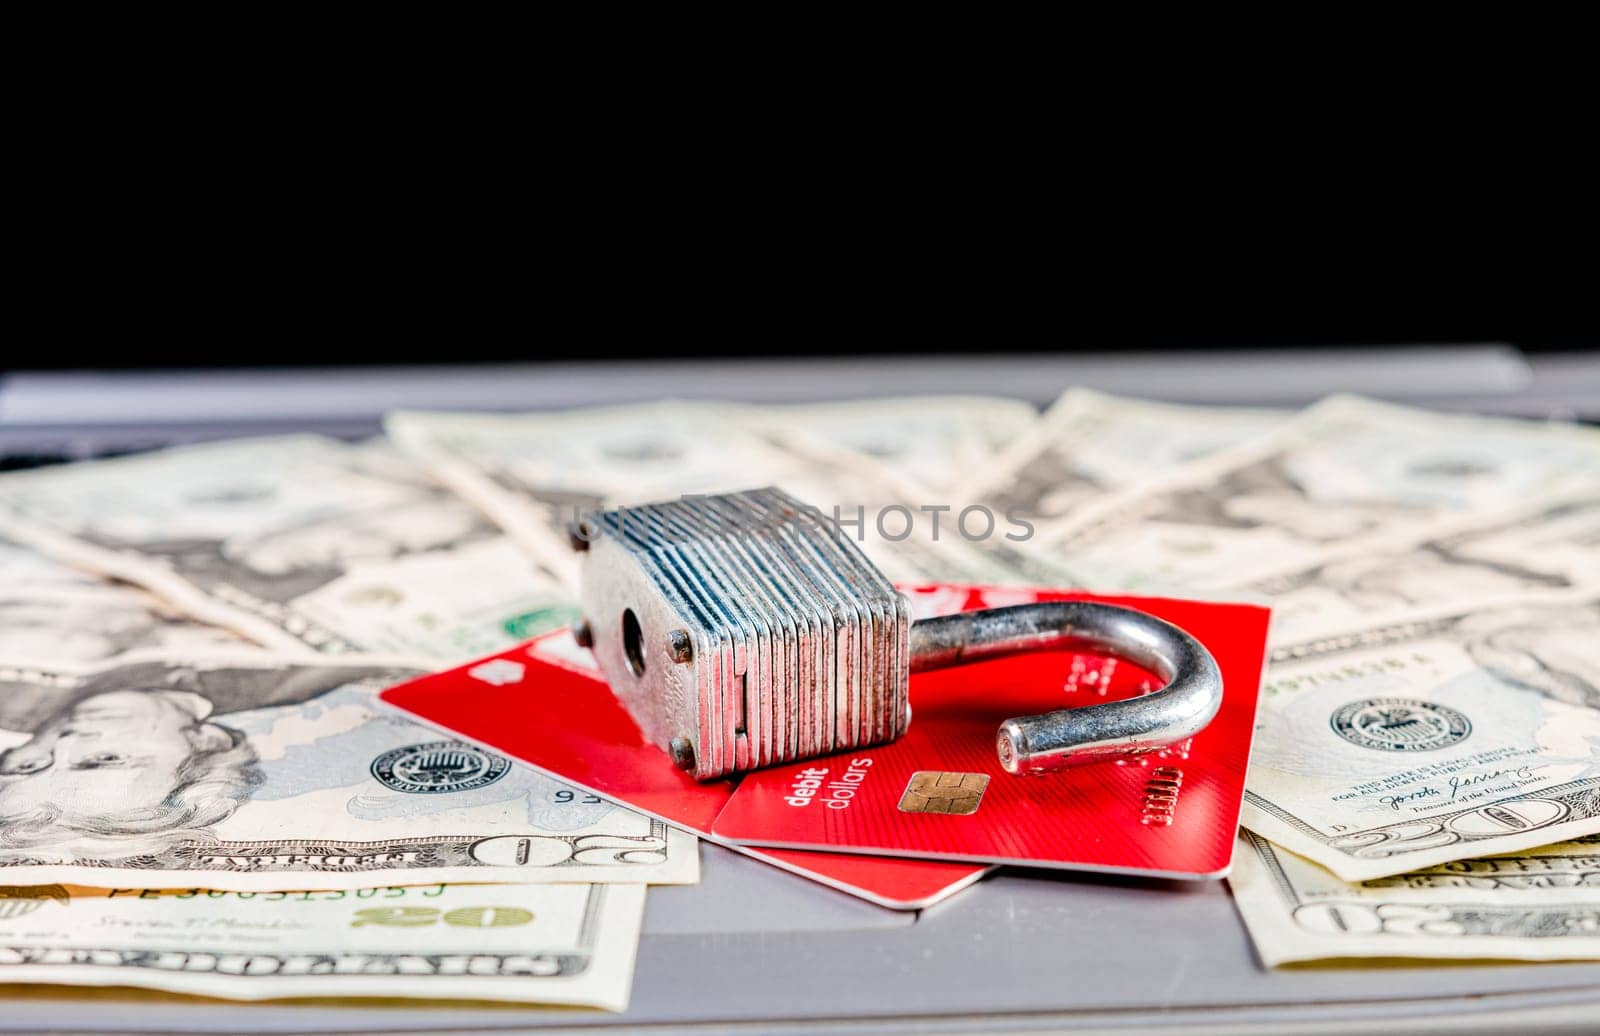 Padlock with credit card on top of dollars. Padlock on top of credit card on dollar bills, Concept of credit card information theft by isaiphoto